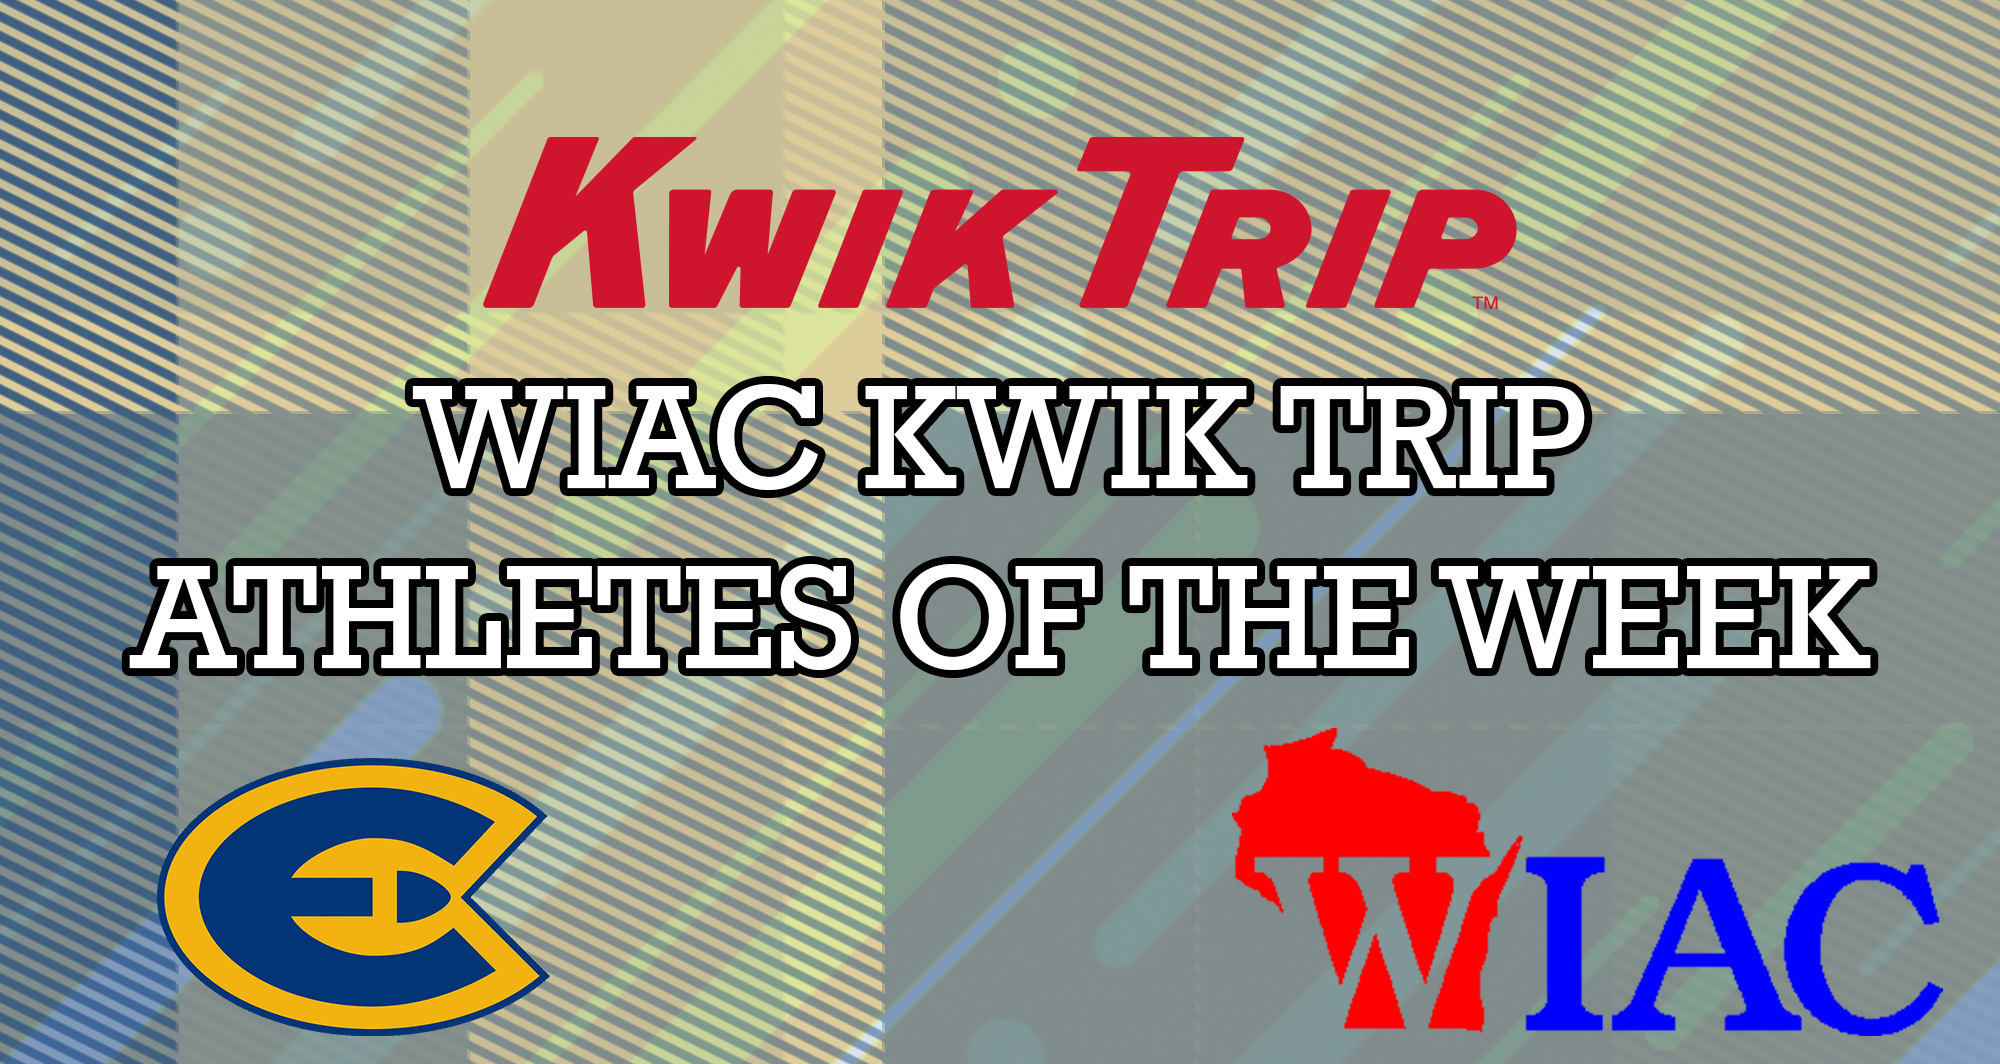 Ruden and Zavoral Named Kwik Trip Athletes of the Week